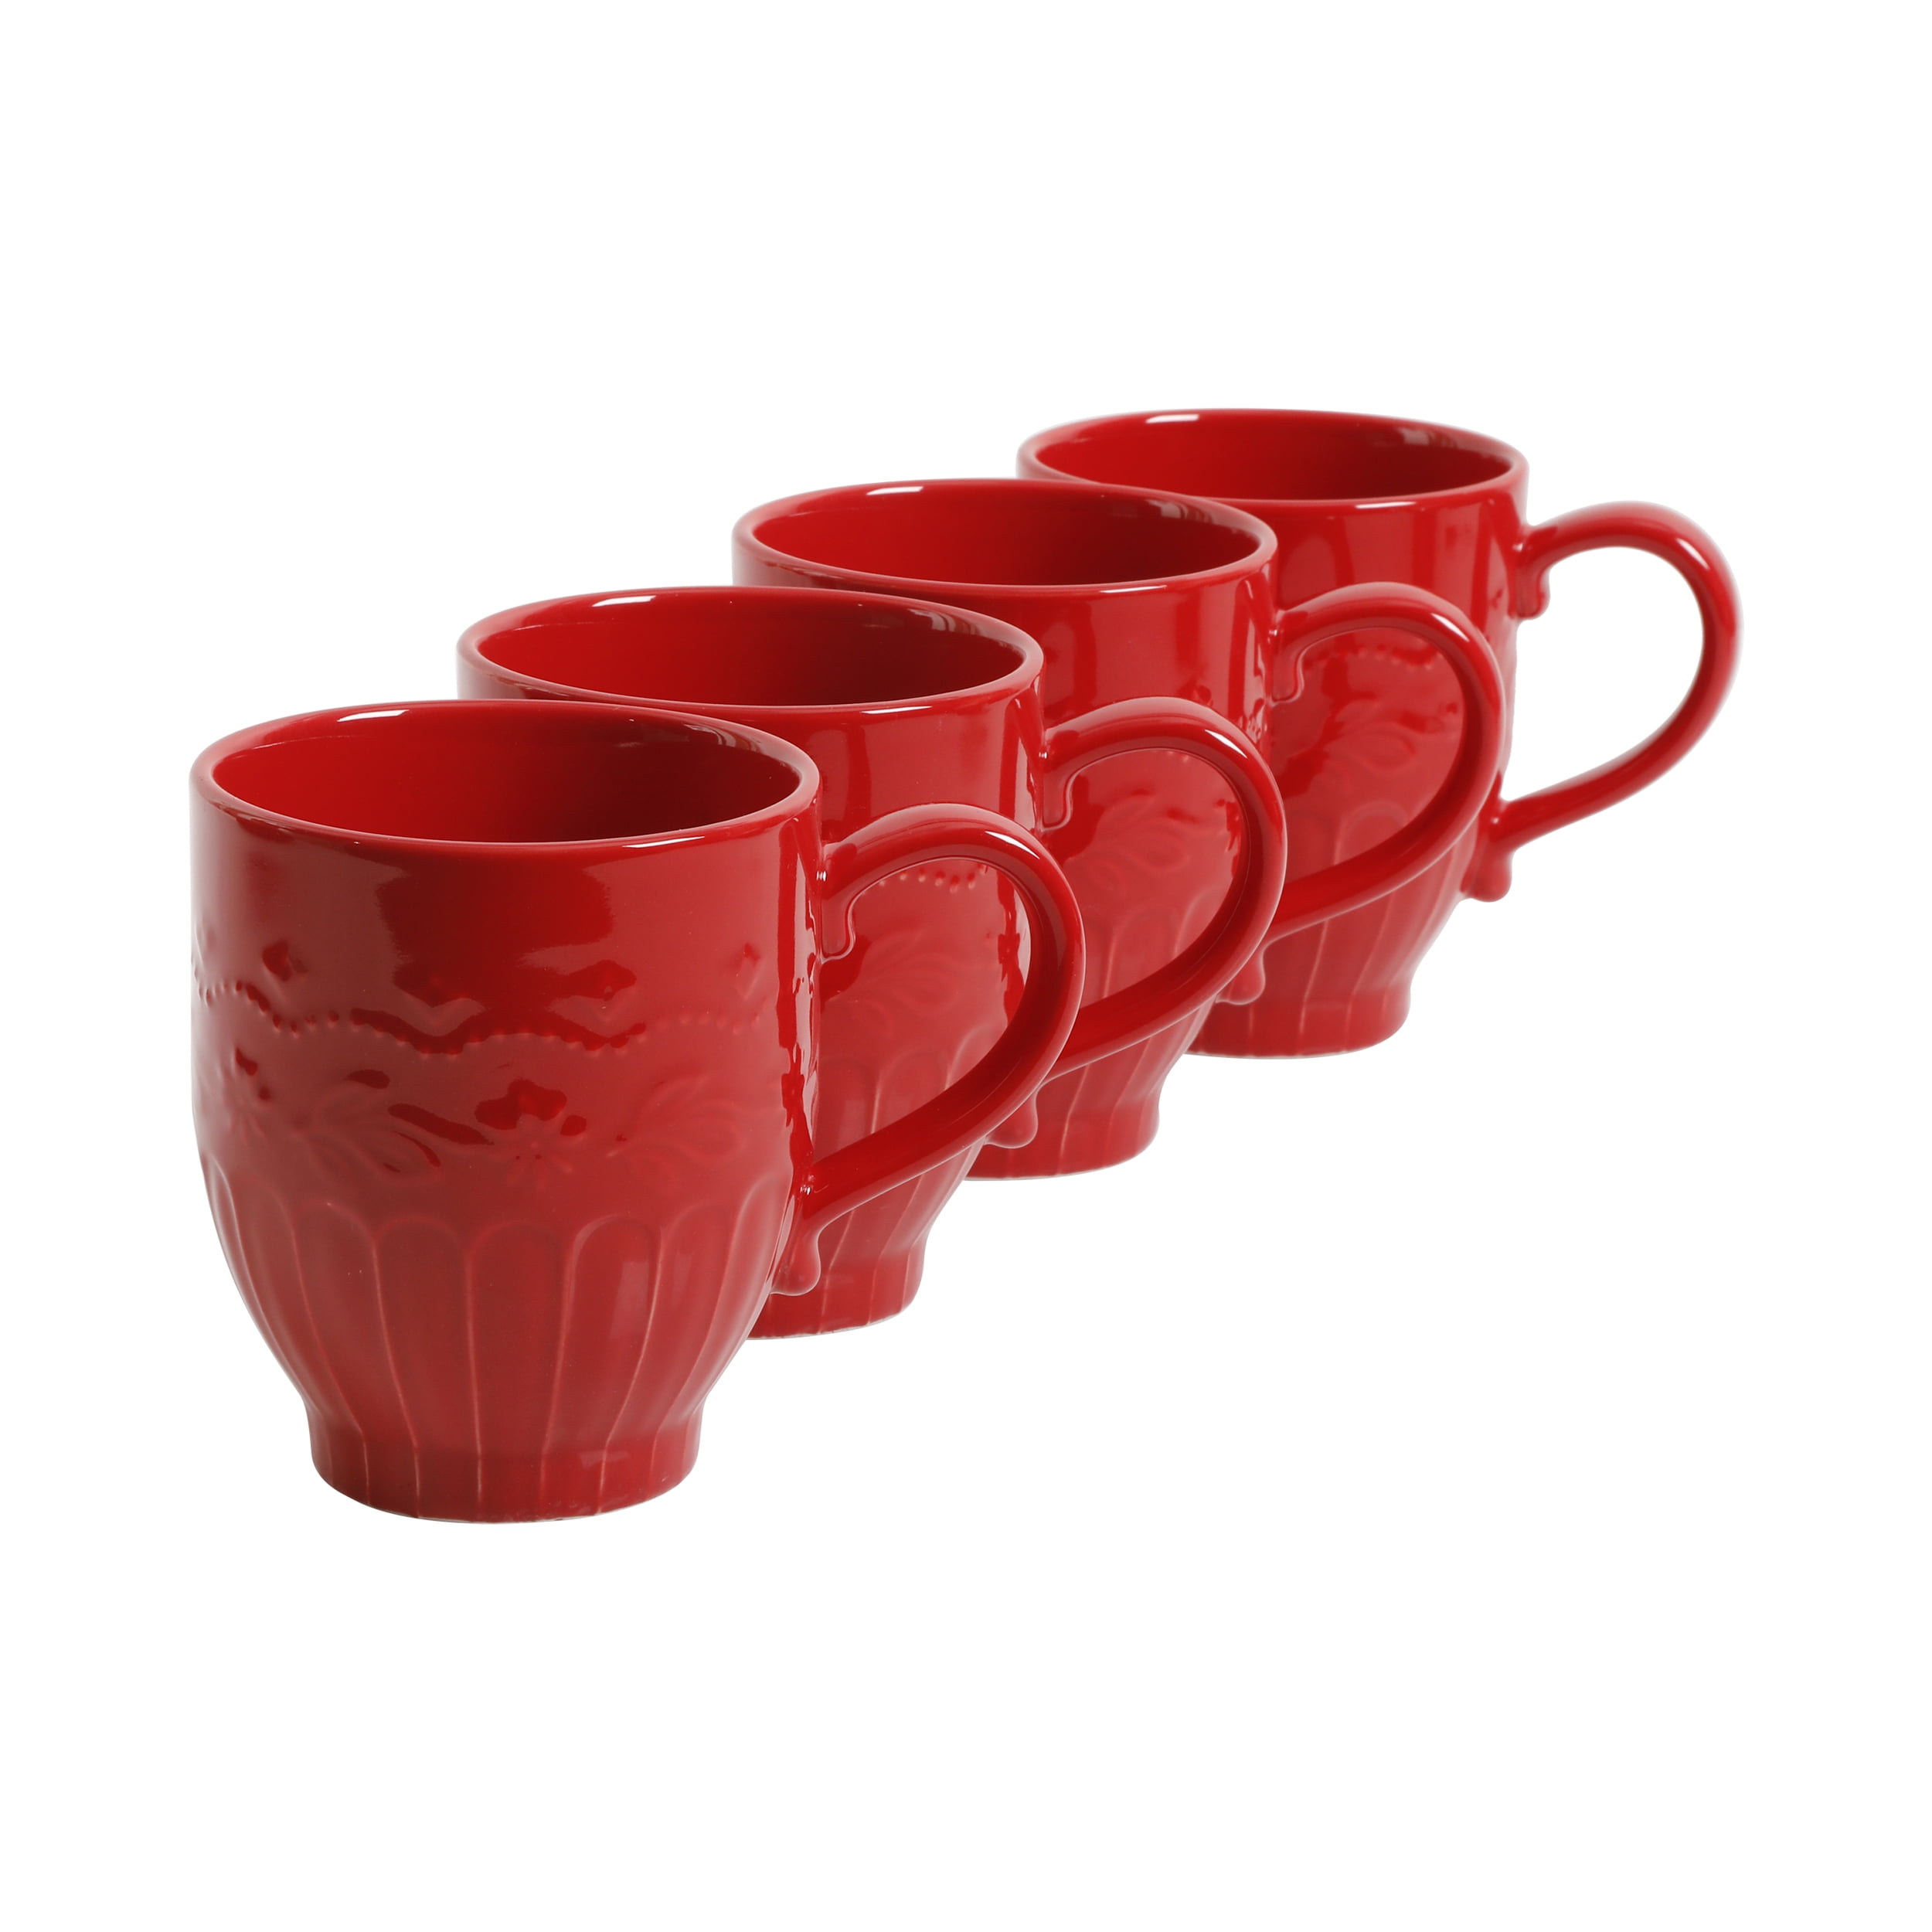 ALMA 12oz Handpainted Red Flower Mug, Great Ceramic Gift For Festival  Decor, Microwavable Coffee Cup(Red Passion,Medium)